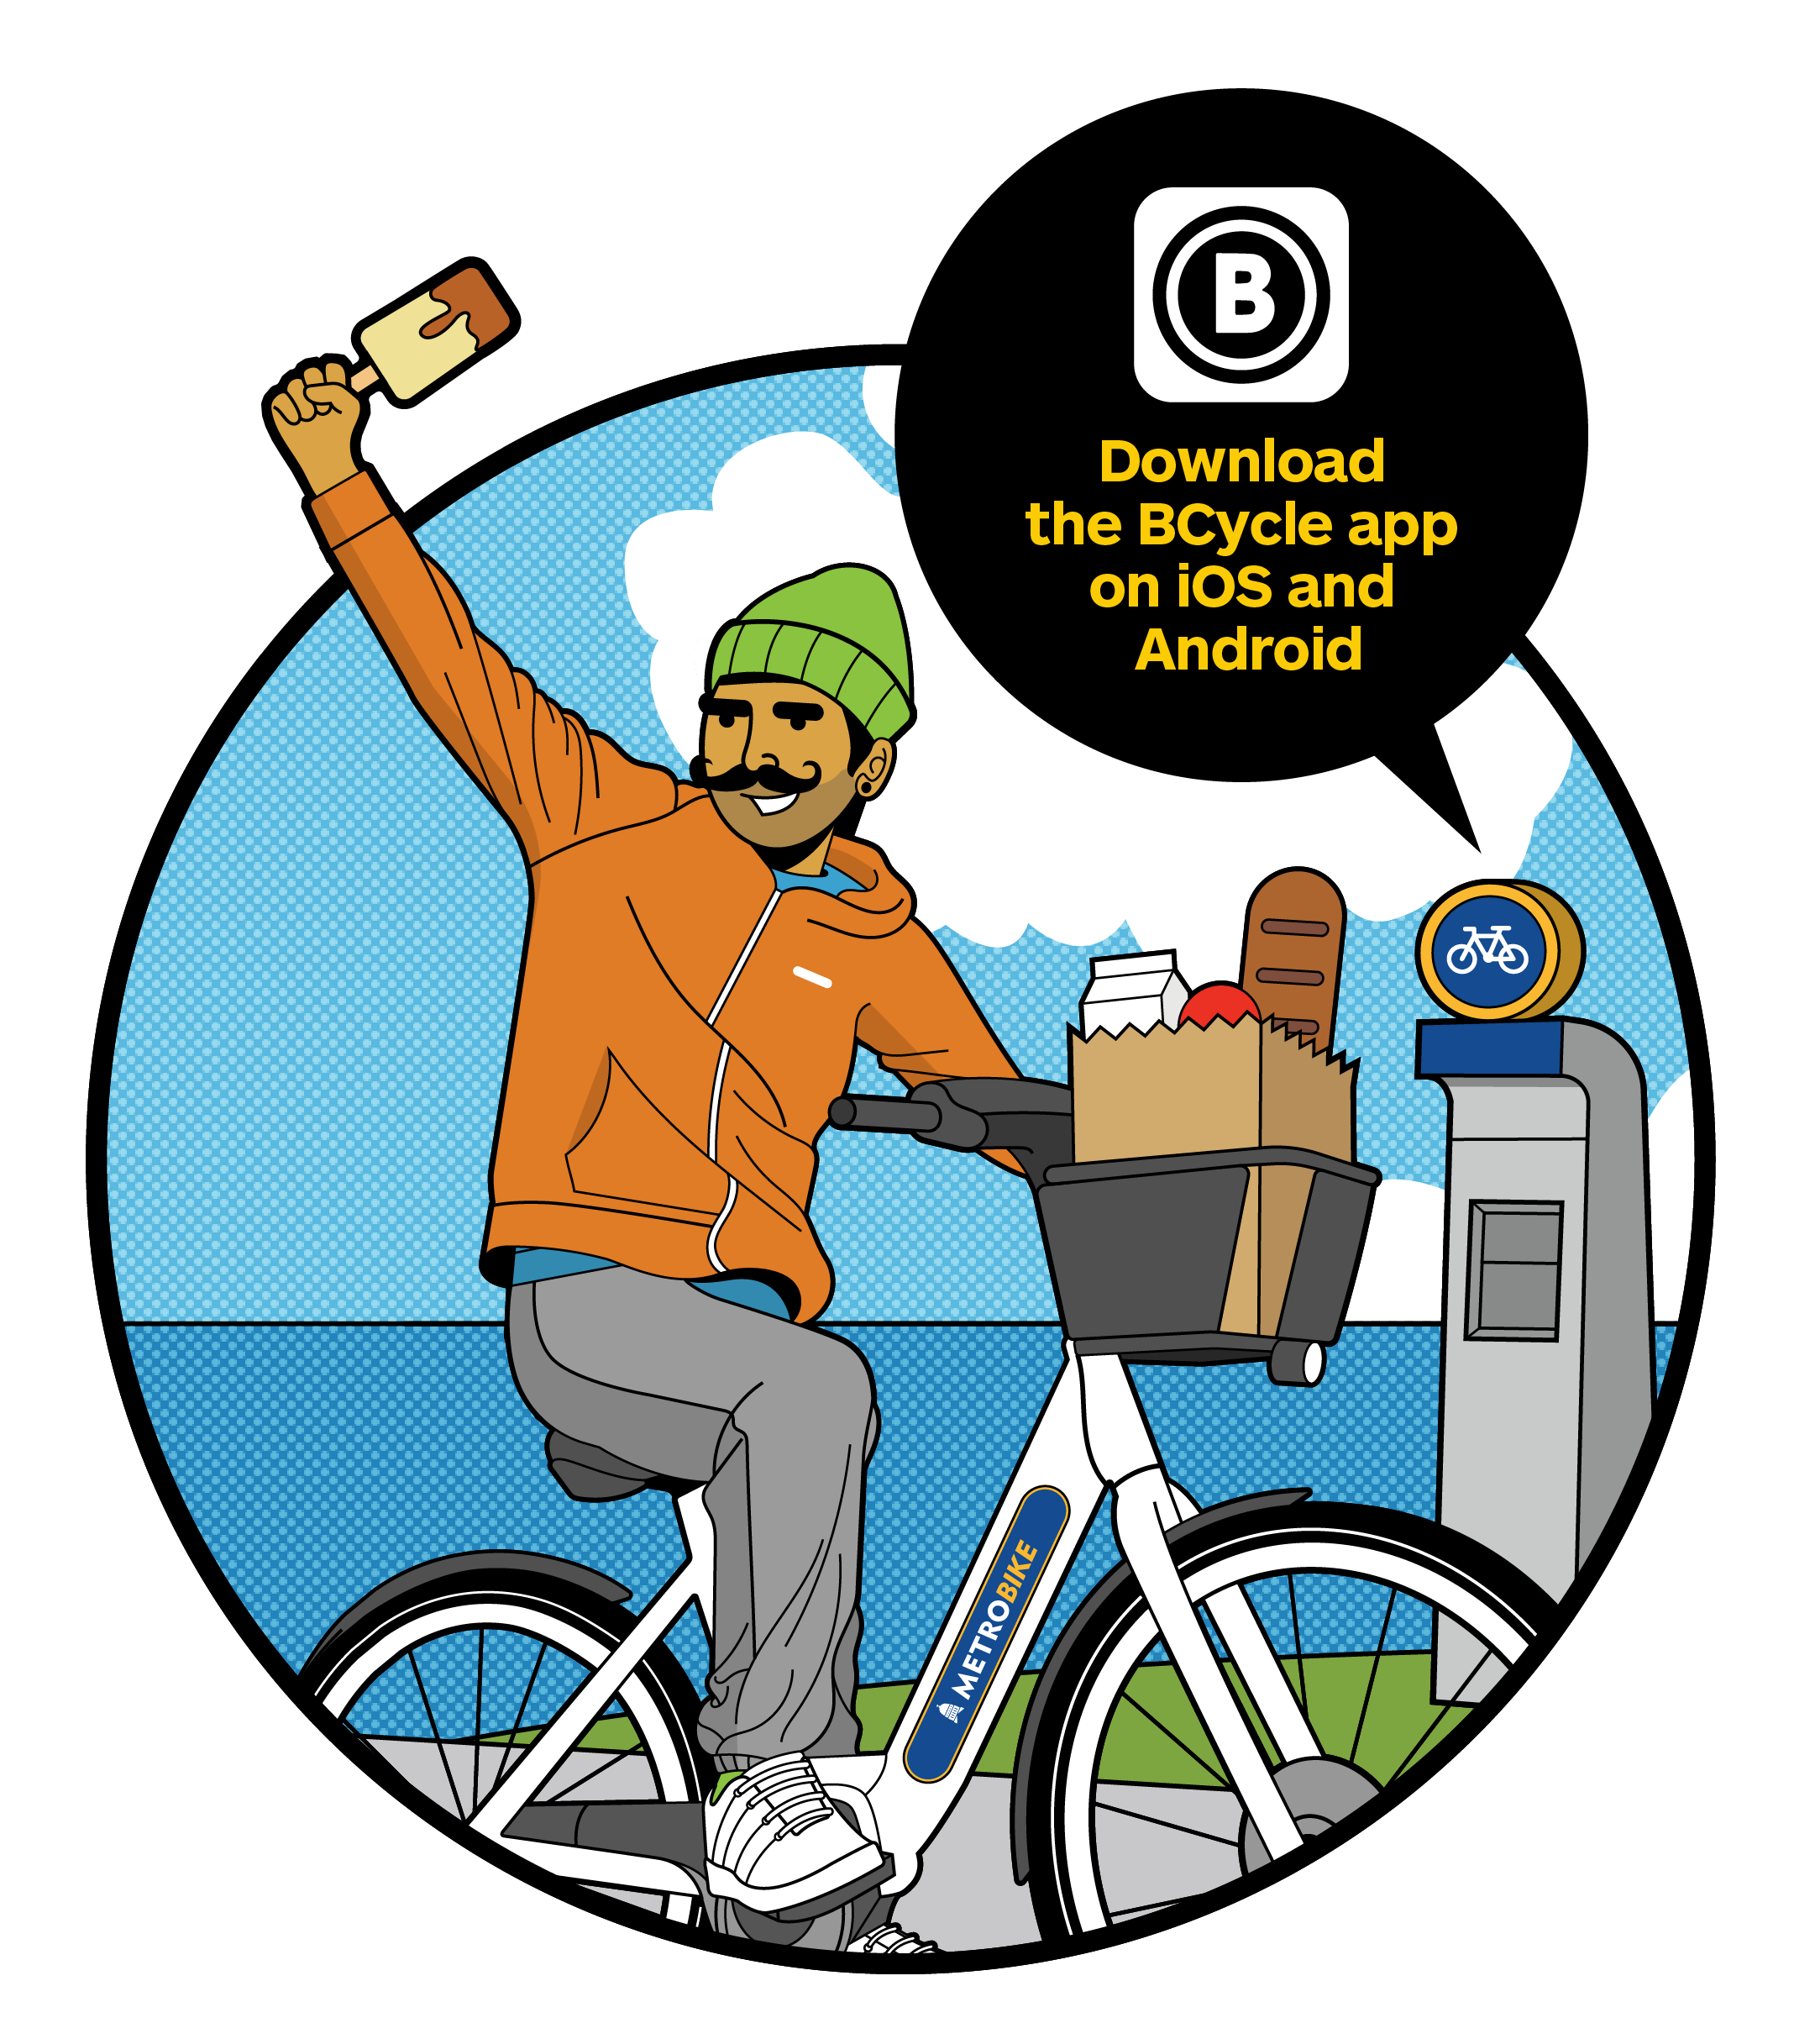 Illustration of a person on a bike with groceries in the cart and the text 